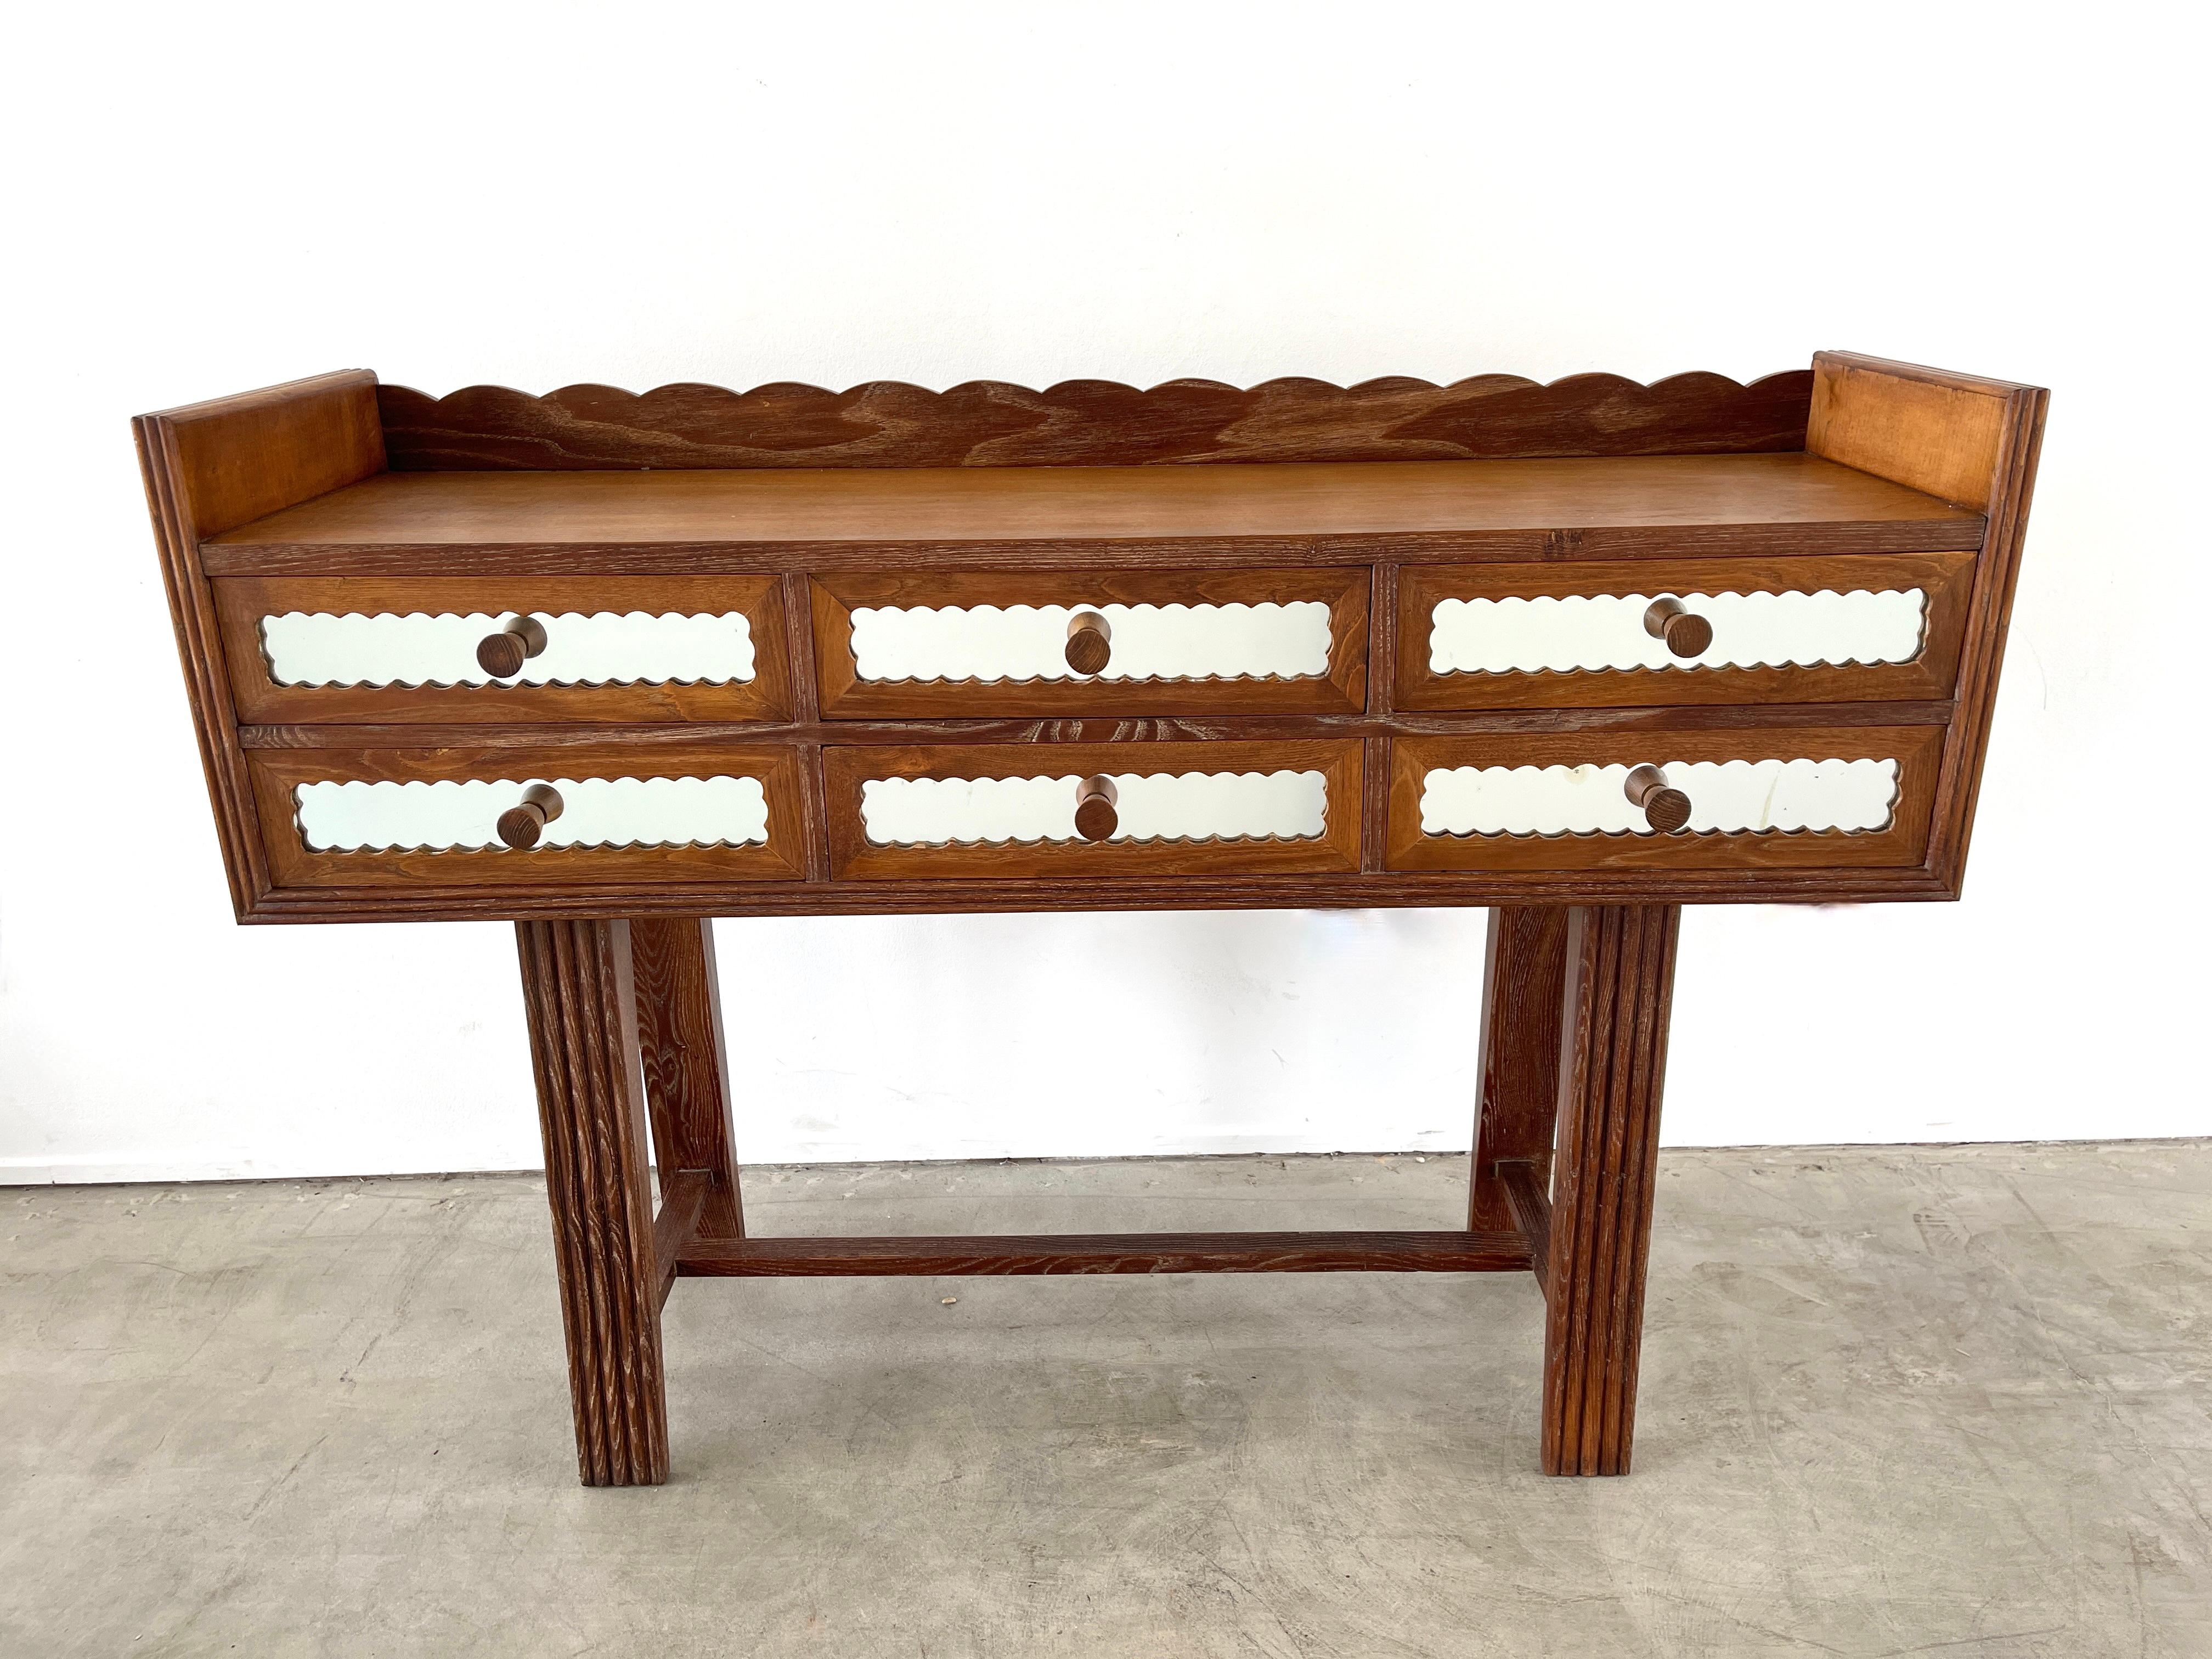 1940's Italian mirrored console with scalloped detail, carved edges and mirrored drawer fronts. 
Incredible piece.